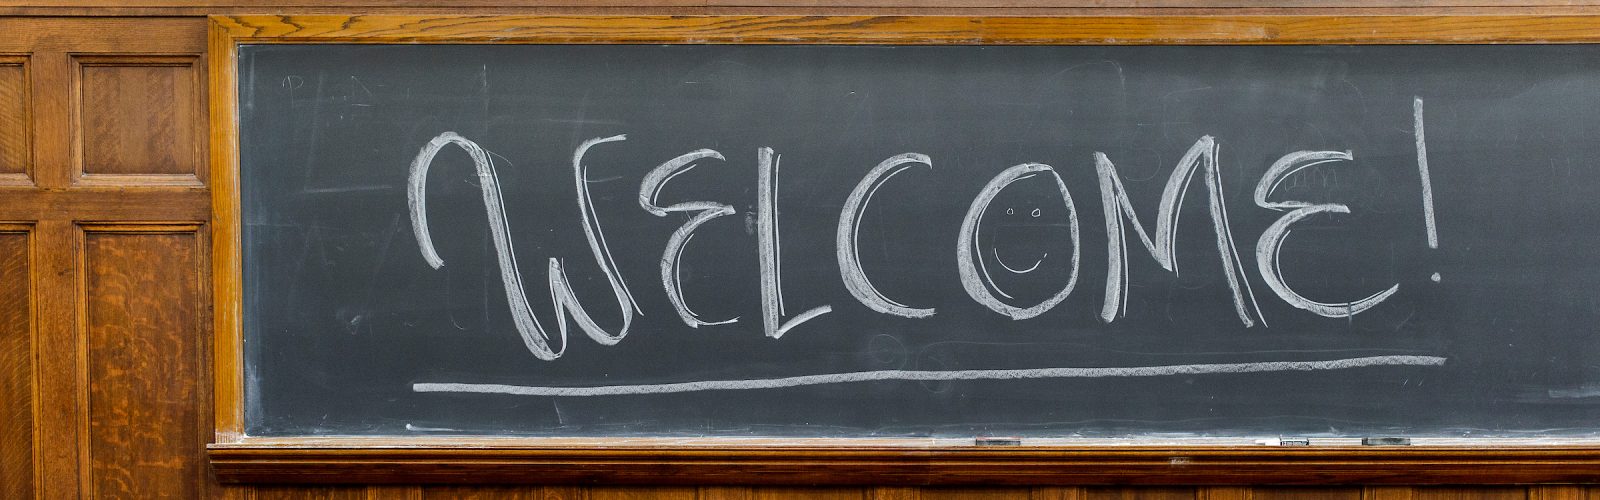 a chalkboard says WELCOME!